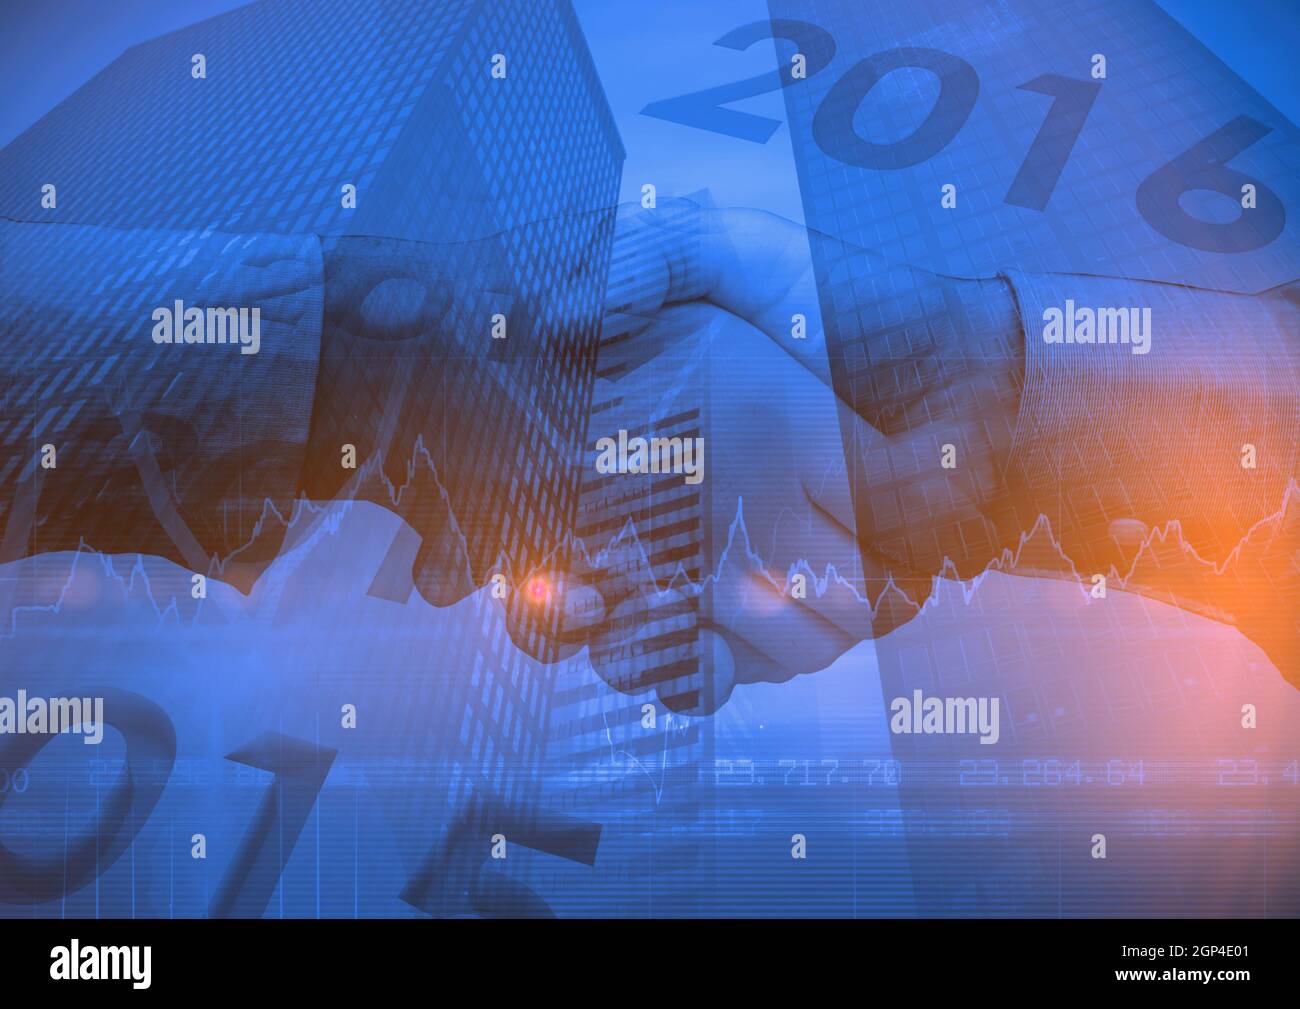 Composition of financial data over business people holding hands and cityscape Stock Photo